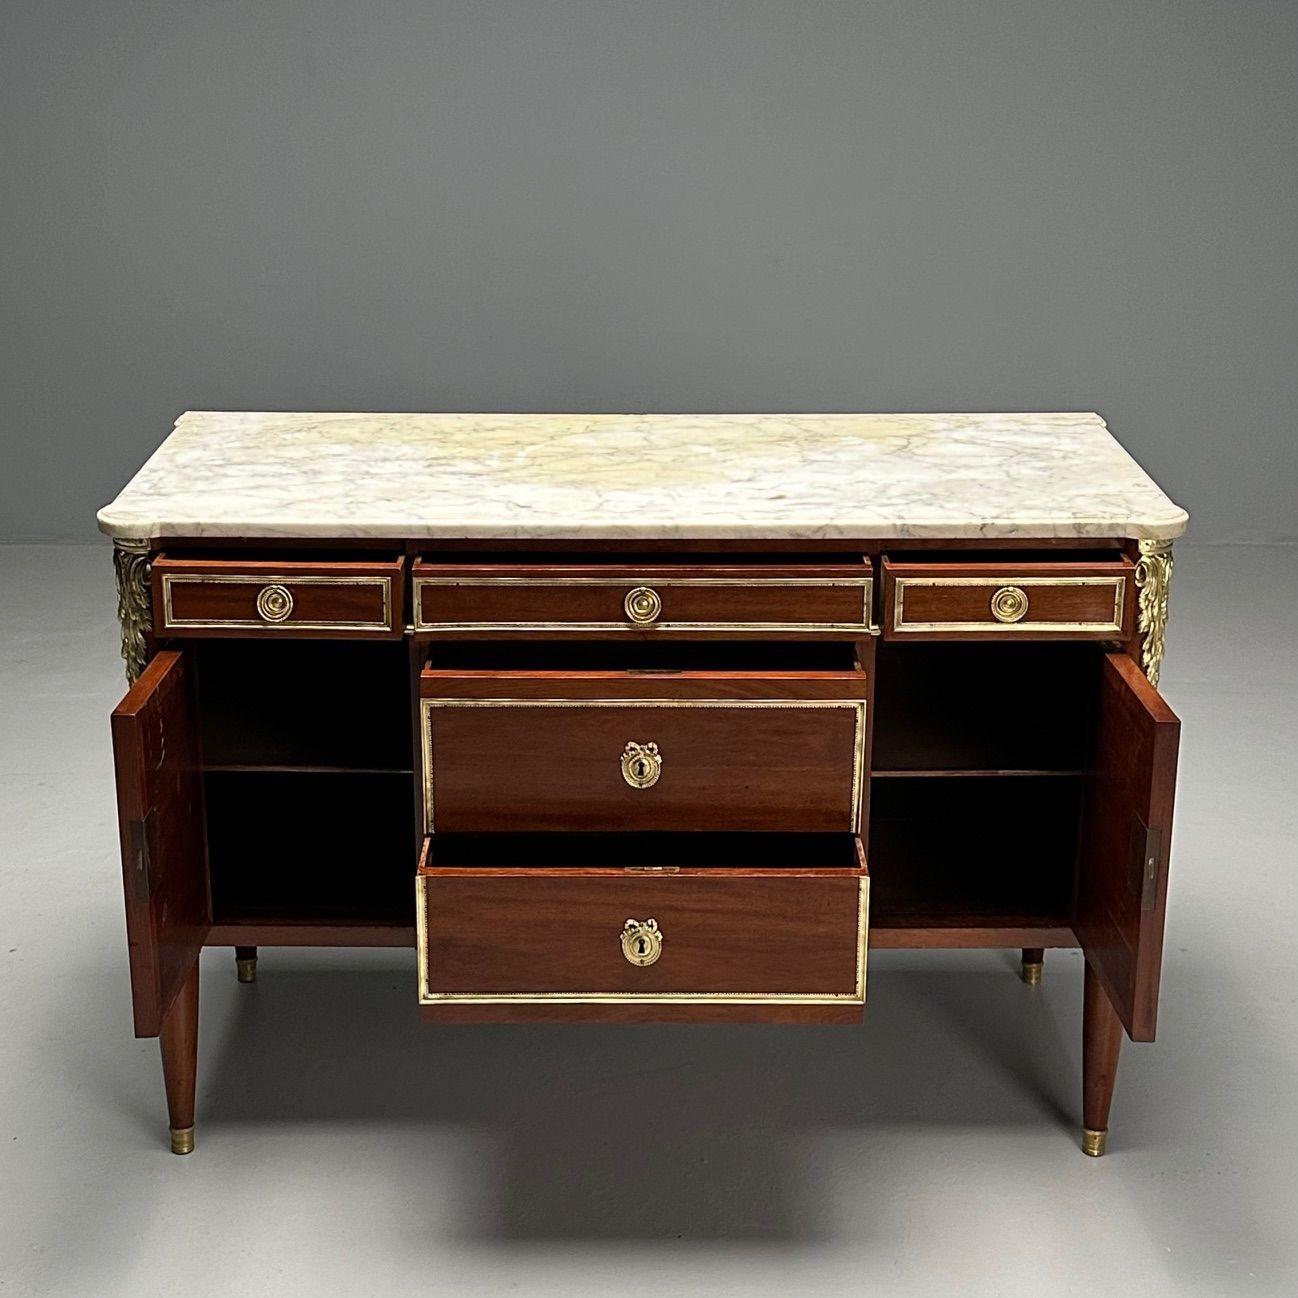 Hollywood Regency, French Louis XVI Style Commode, Mahogany, Oak, Marble, 1920s For Sale 1